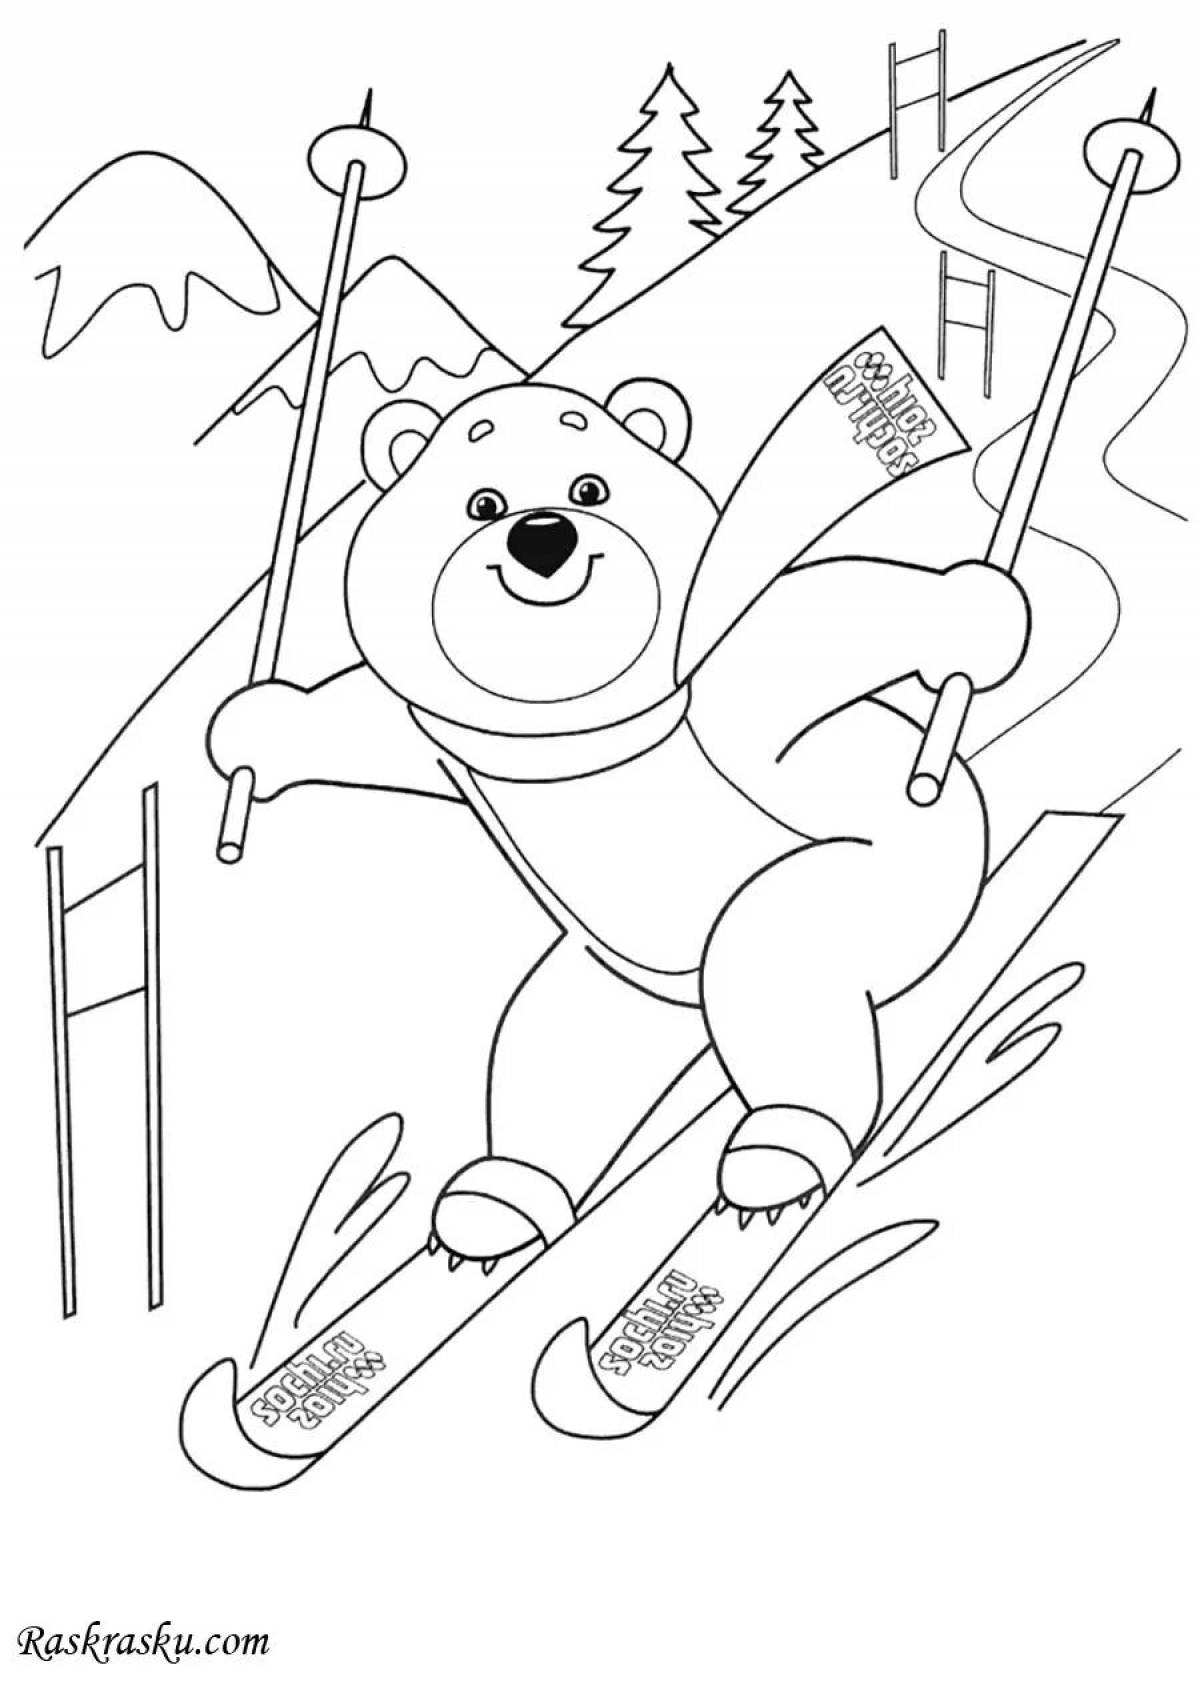 Coloring page energetic bear on skis